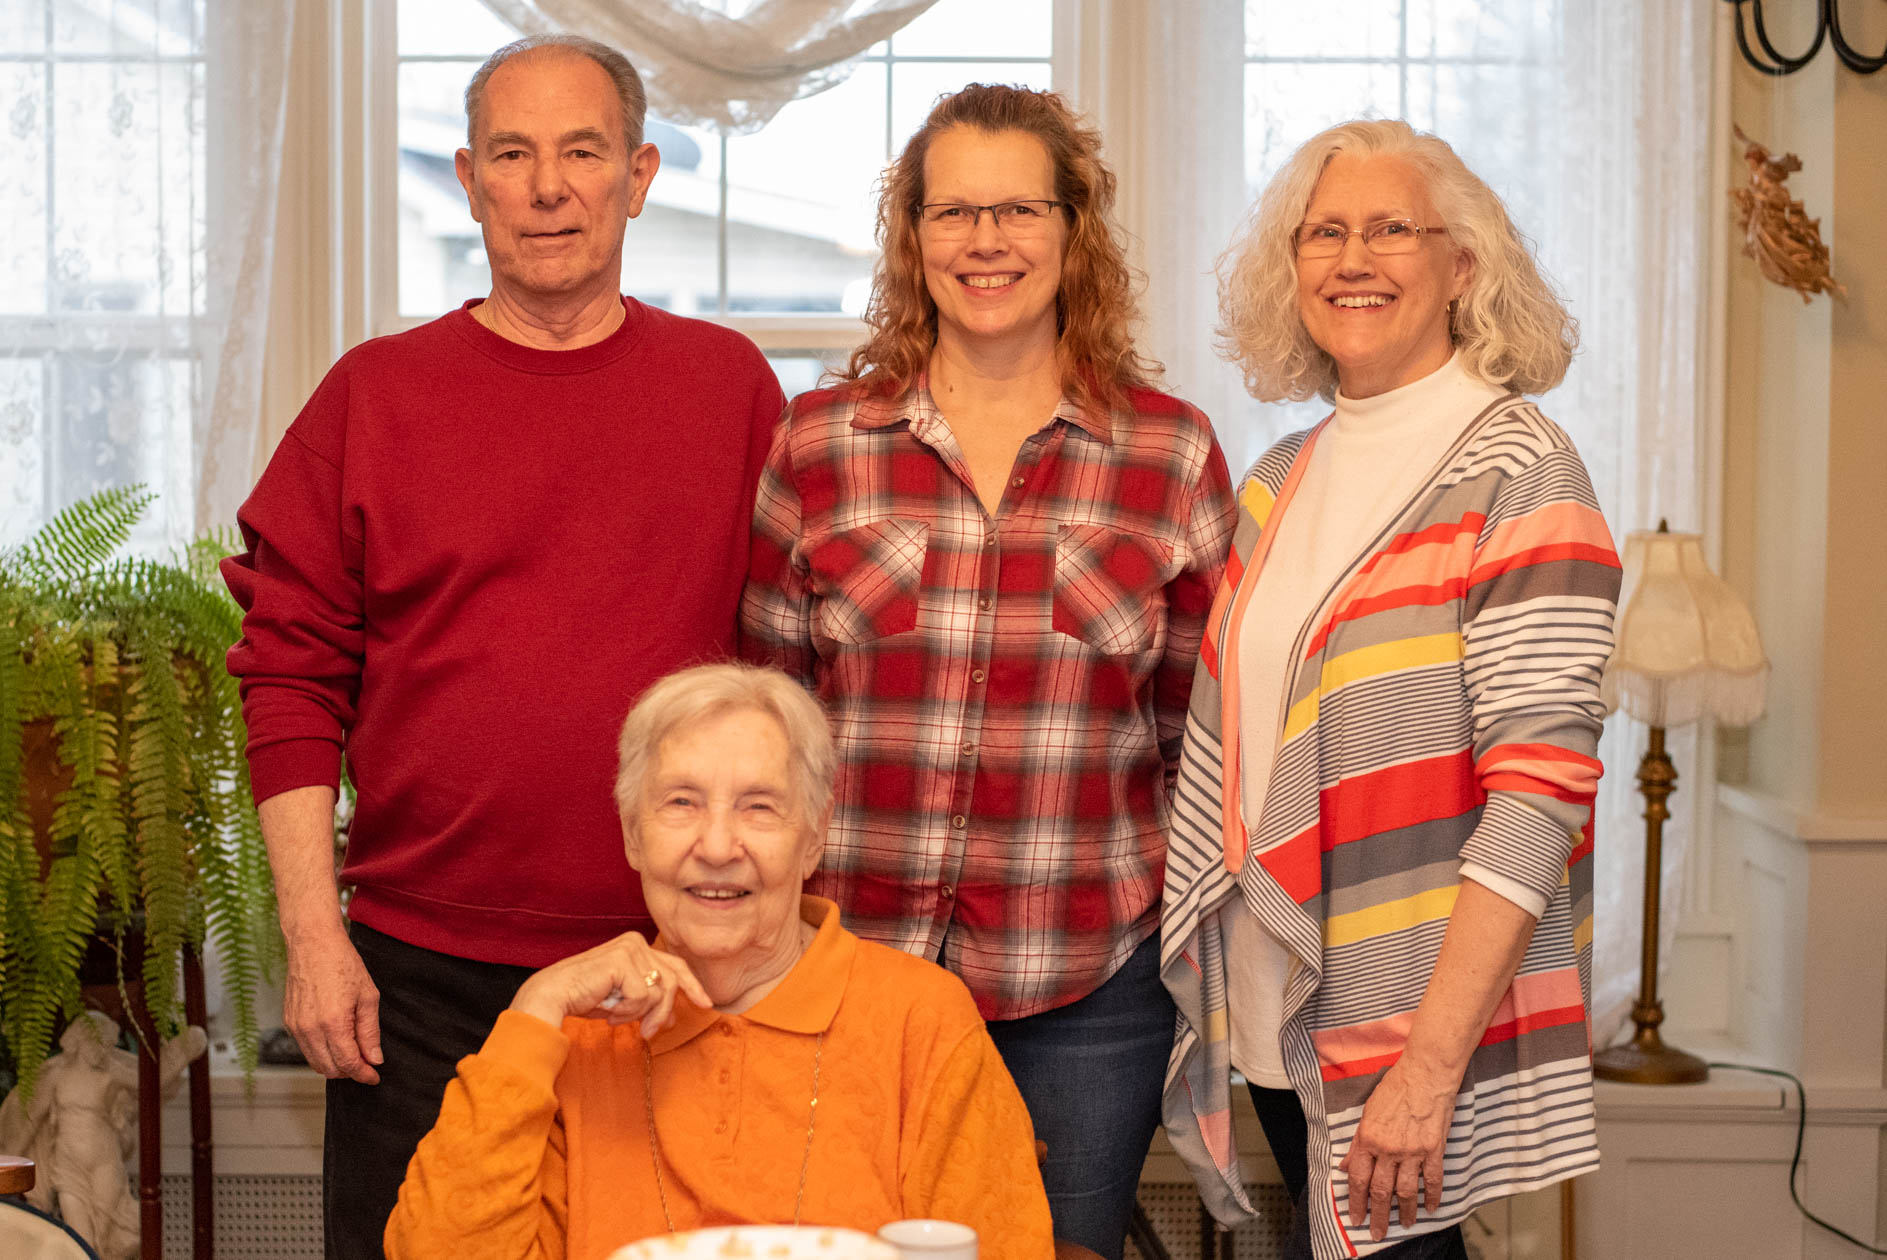 Group family photo of four elderly adults.